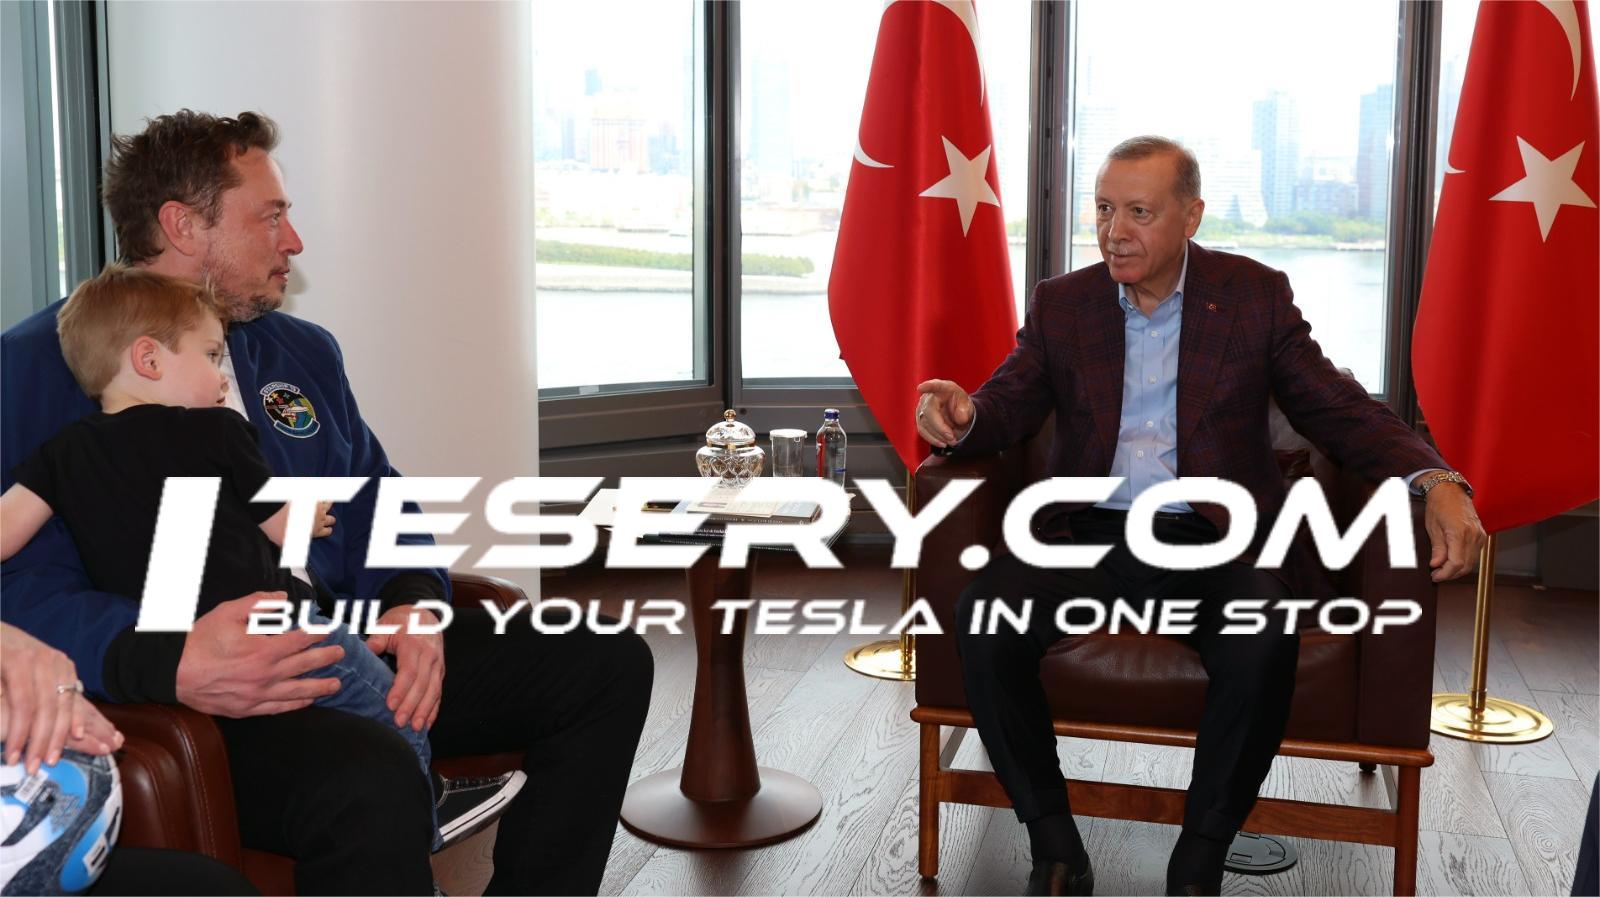 Elon Musk Meets with Turkish President: Talks of a Potential Tesla Gigafactory in Turkey - Tesery Official Store